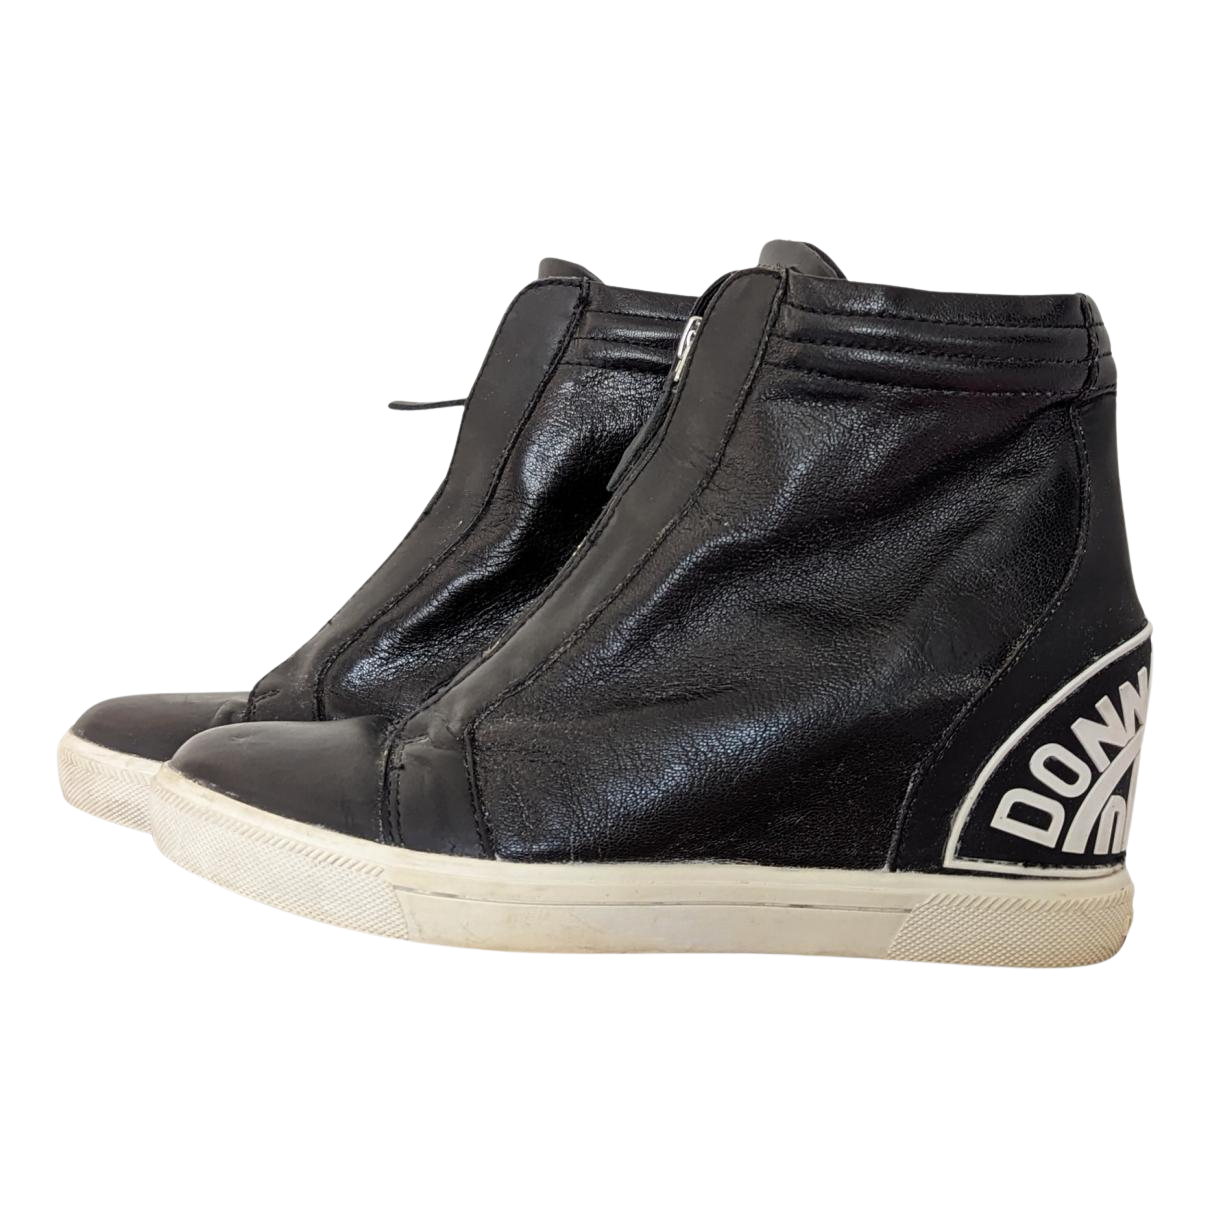 https://storage.googleapis.com/download/storage/v1/b/whering.appspot.com/o/marketplace_product_images%2Fdkny-leather-trainers-black-tXXRCyks3ScWTrTrxq9C73.png?generation=1689224447865891&alt=media